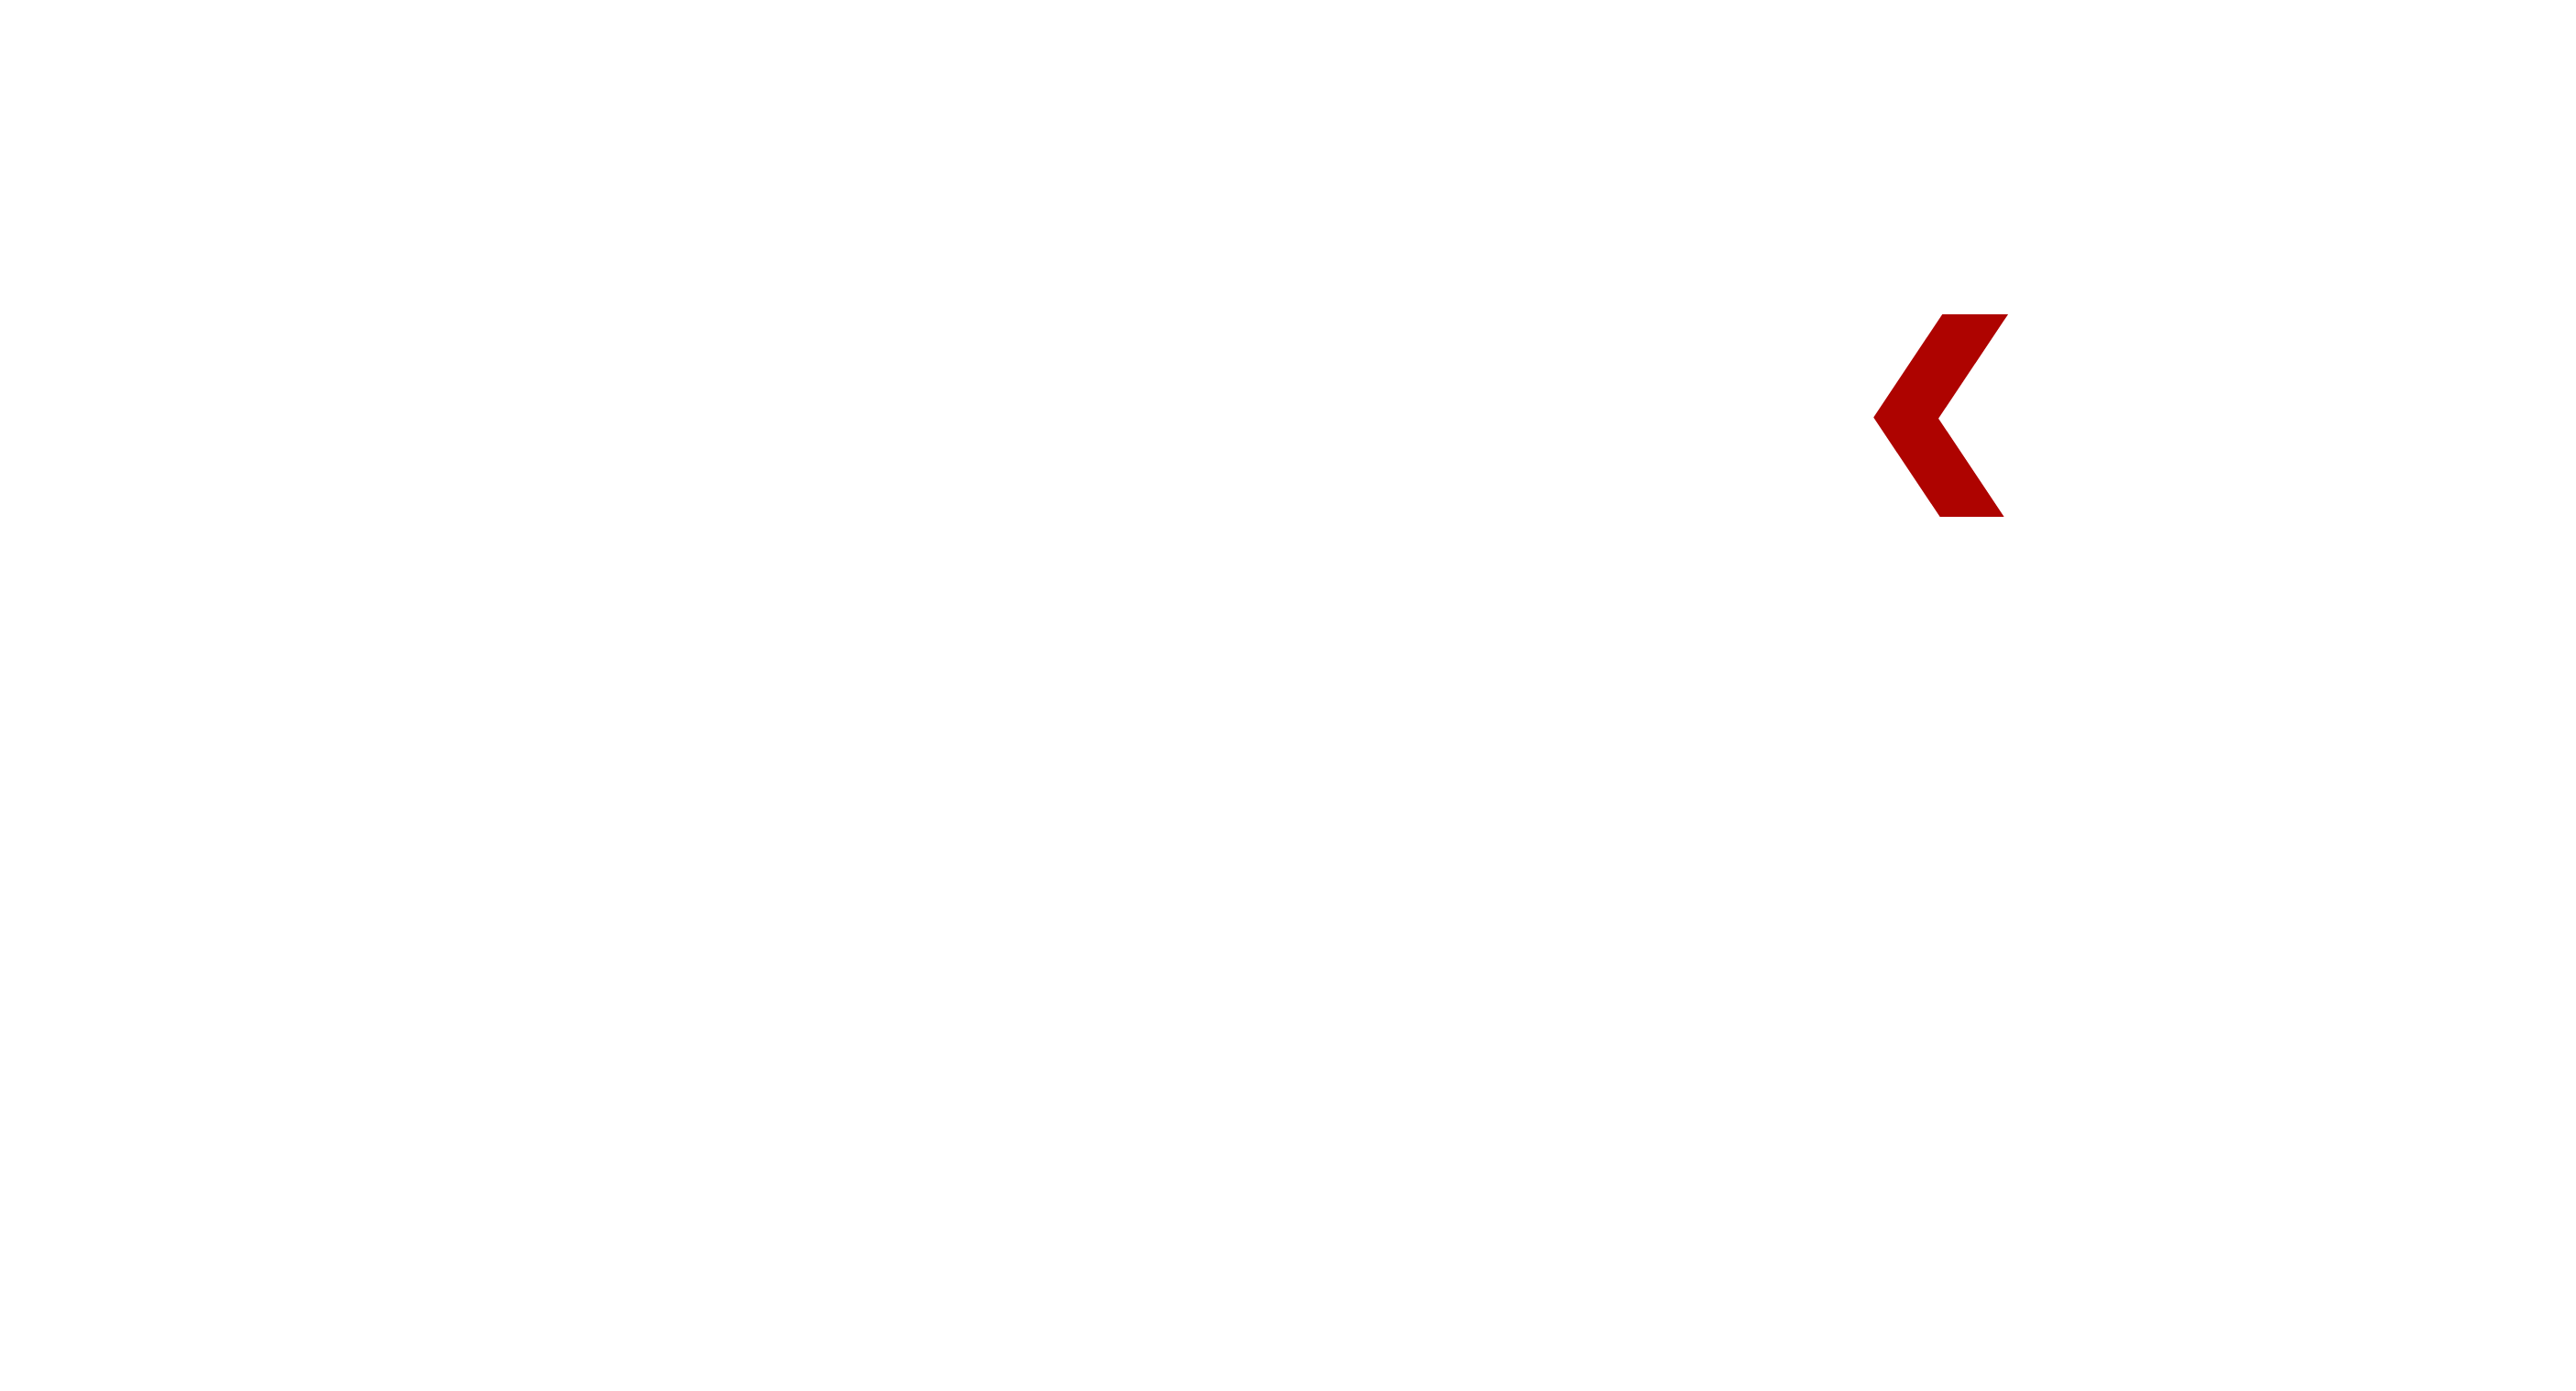 The secret to successful marketing is saying the right thing in the right way in the right place.